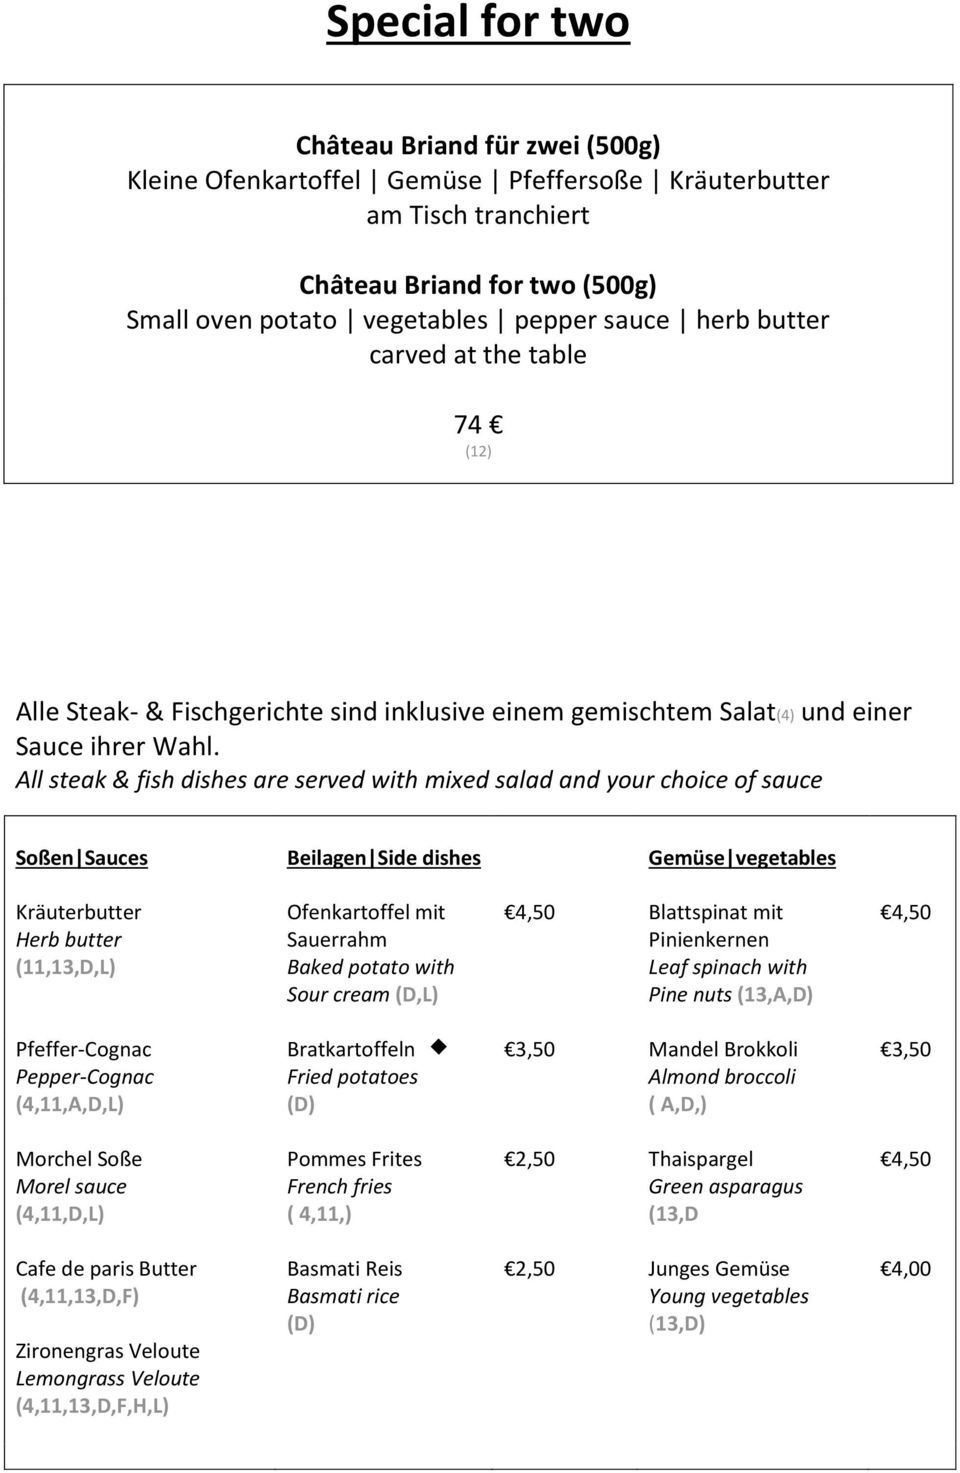 All steak & fish dishes are served with mixed salad and your choice of sauce Soßen Sauces Beilagen Side dishes Gemüse vegetables Kräuterbutter Herb butter (11,13,D,L) Ofenkartoffel mit Sauerrahm